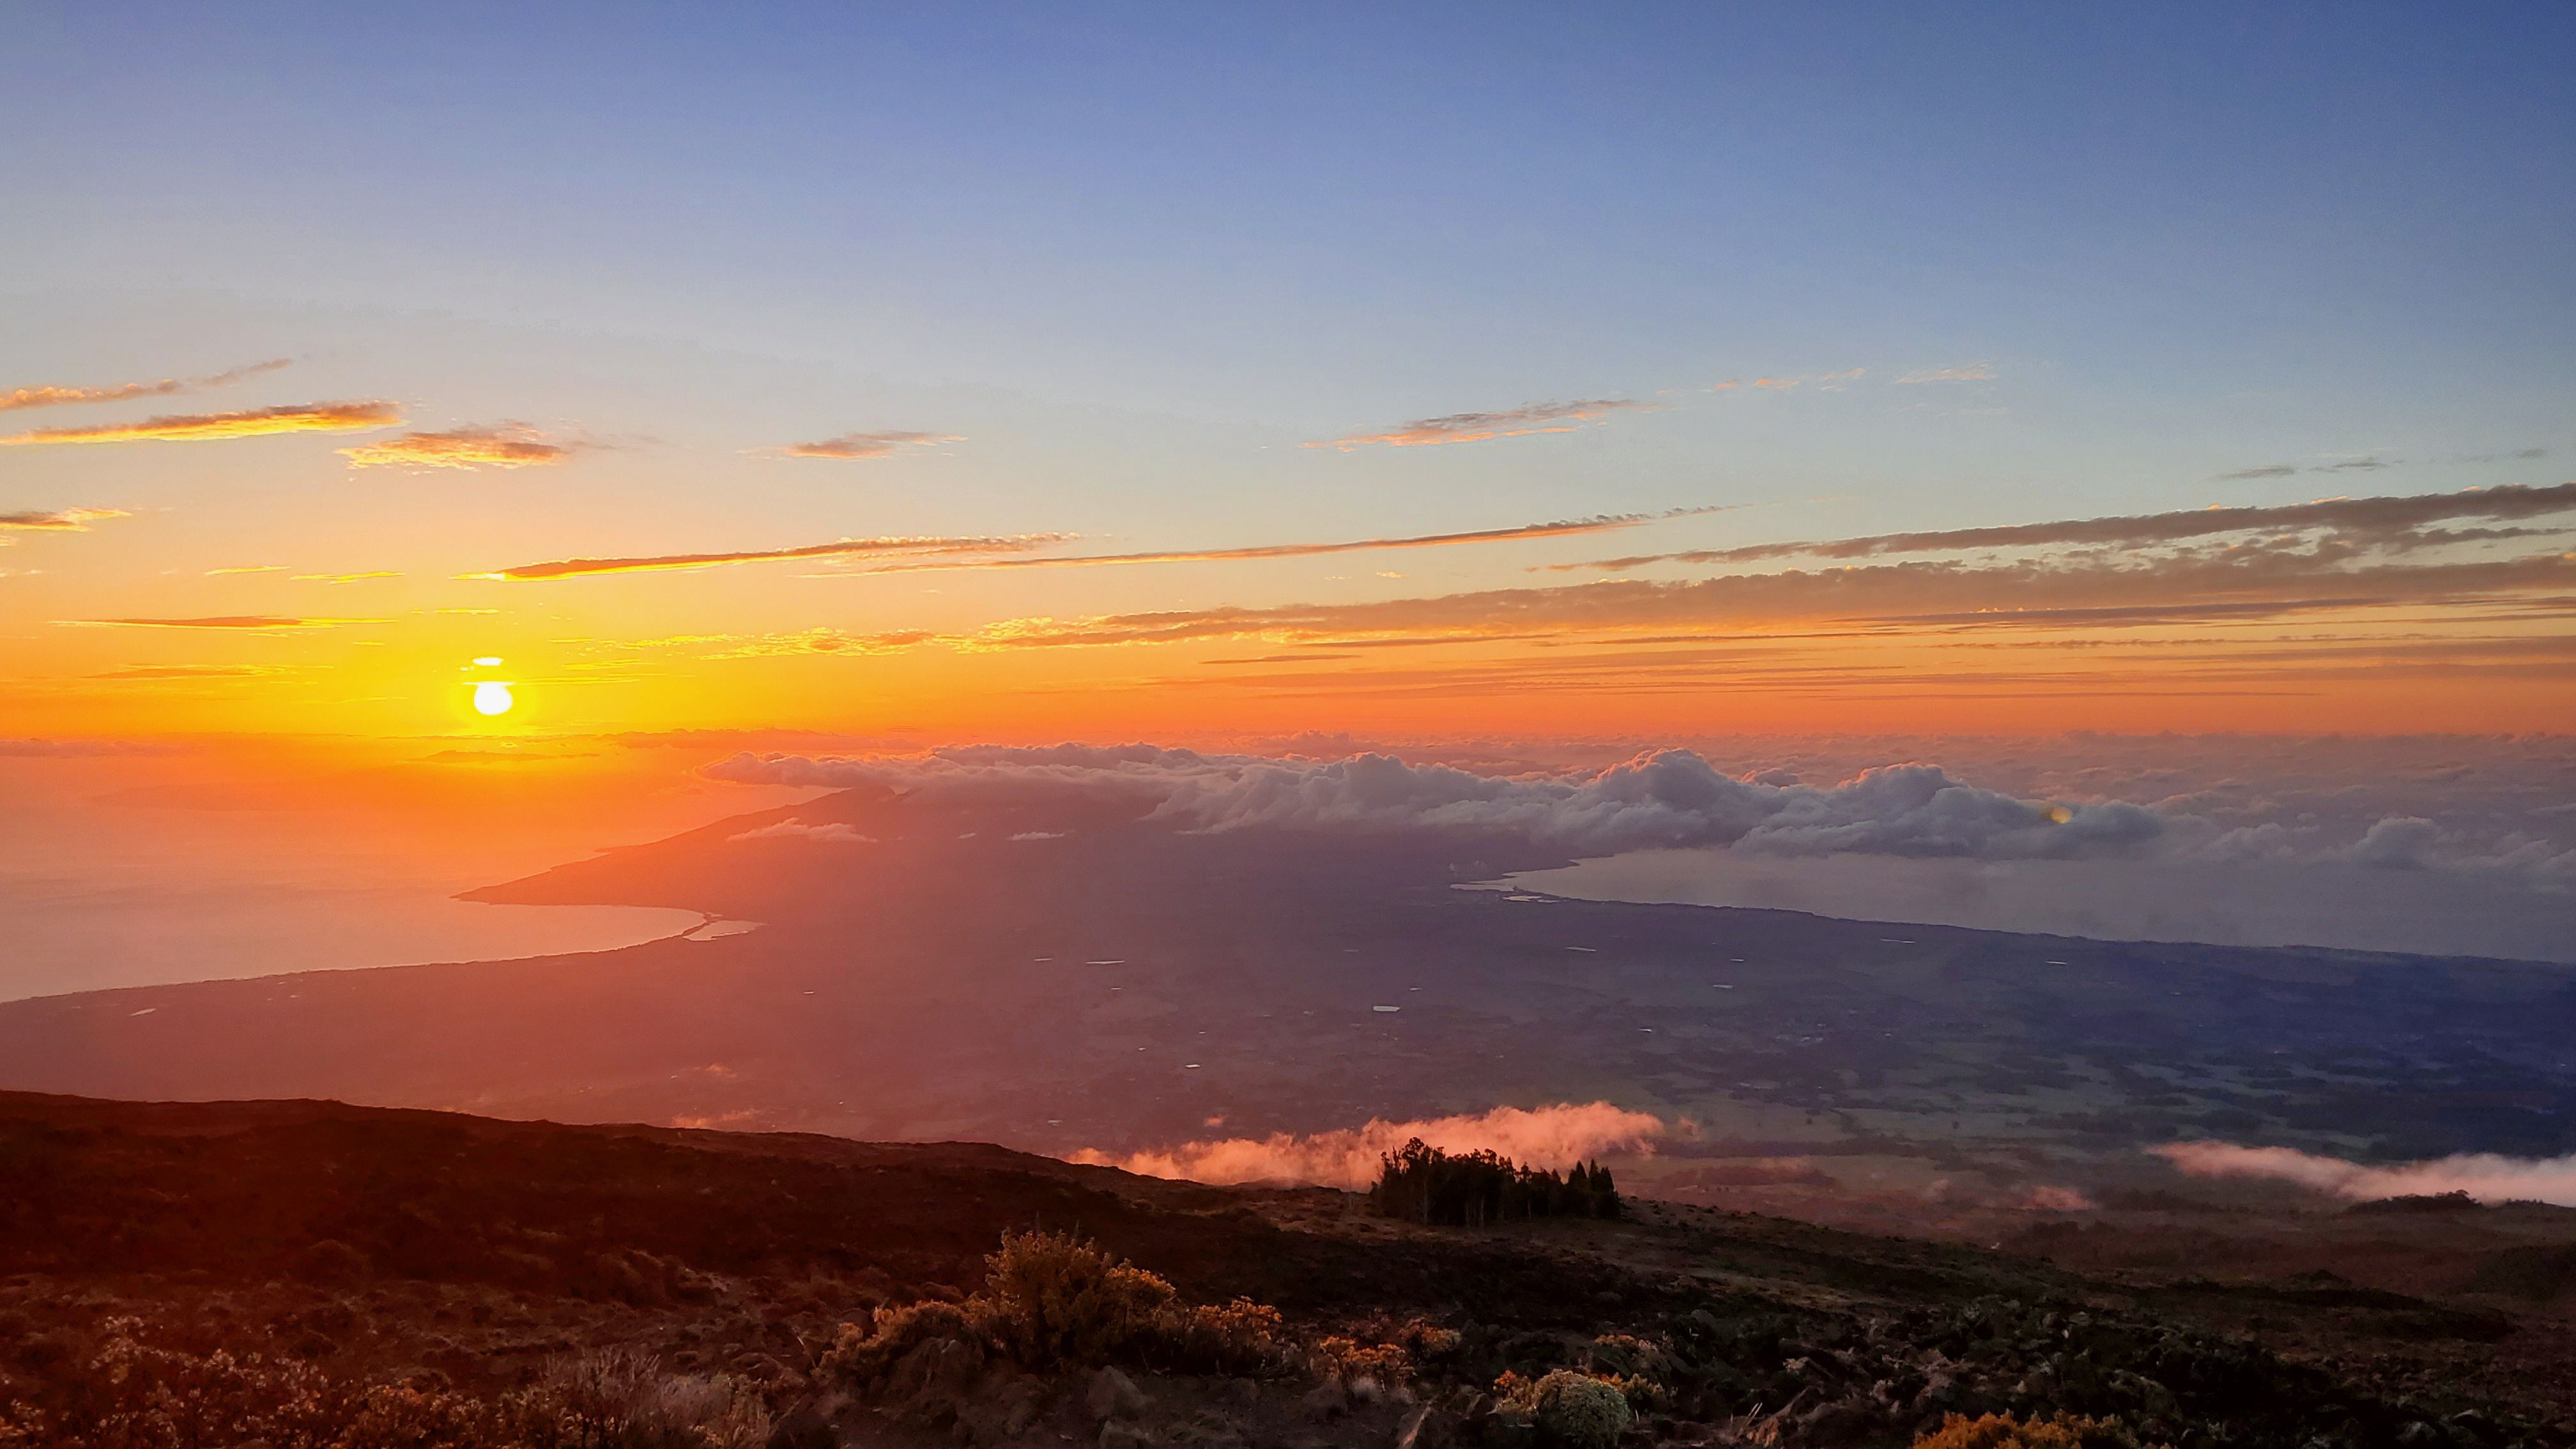 <p><b>Average Star Review: </b>4.812</p><p>Stand above the clouds and watch the sun set on top of a dormant volcano. Haleakala National Park offers a sunset experience like no other. The high altitude provides a surreal view, making you feel like you’re on another planet. <a href="https://www.nps.gov/hale/planyourvisit/sunset.htm">Plan ahead</a> and head to the summit of Haleakala for an unforgettable experience.</p>